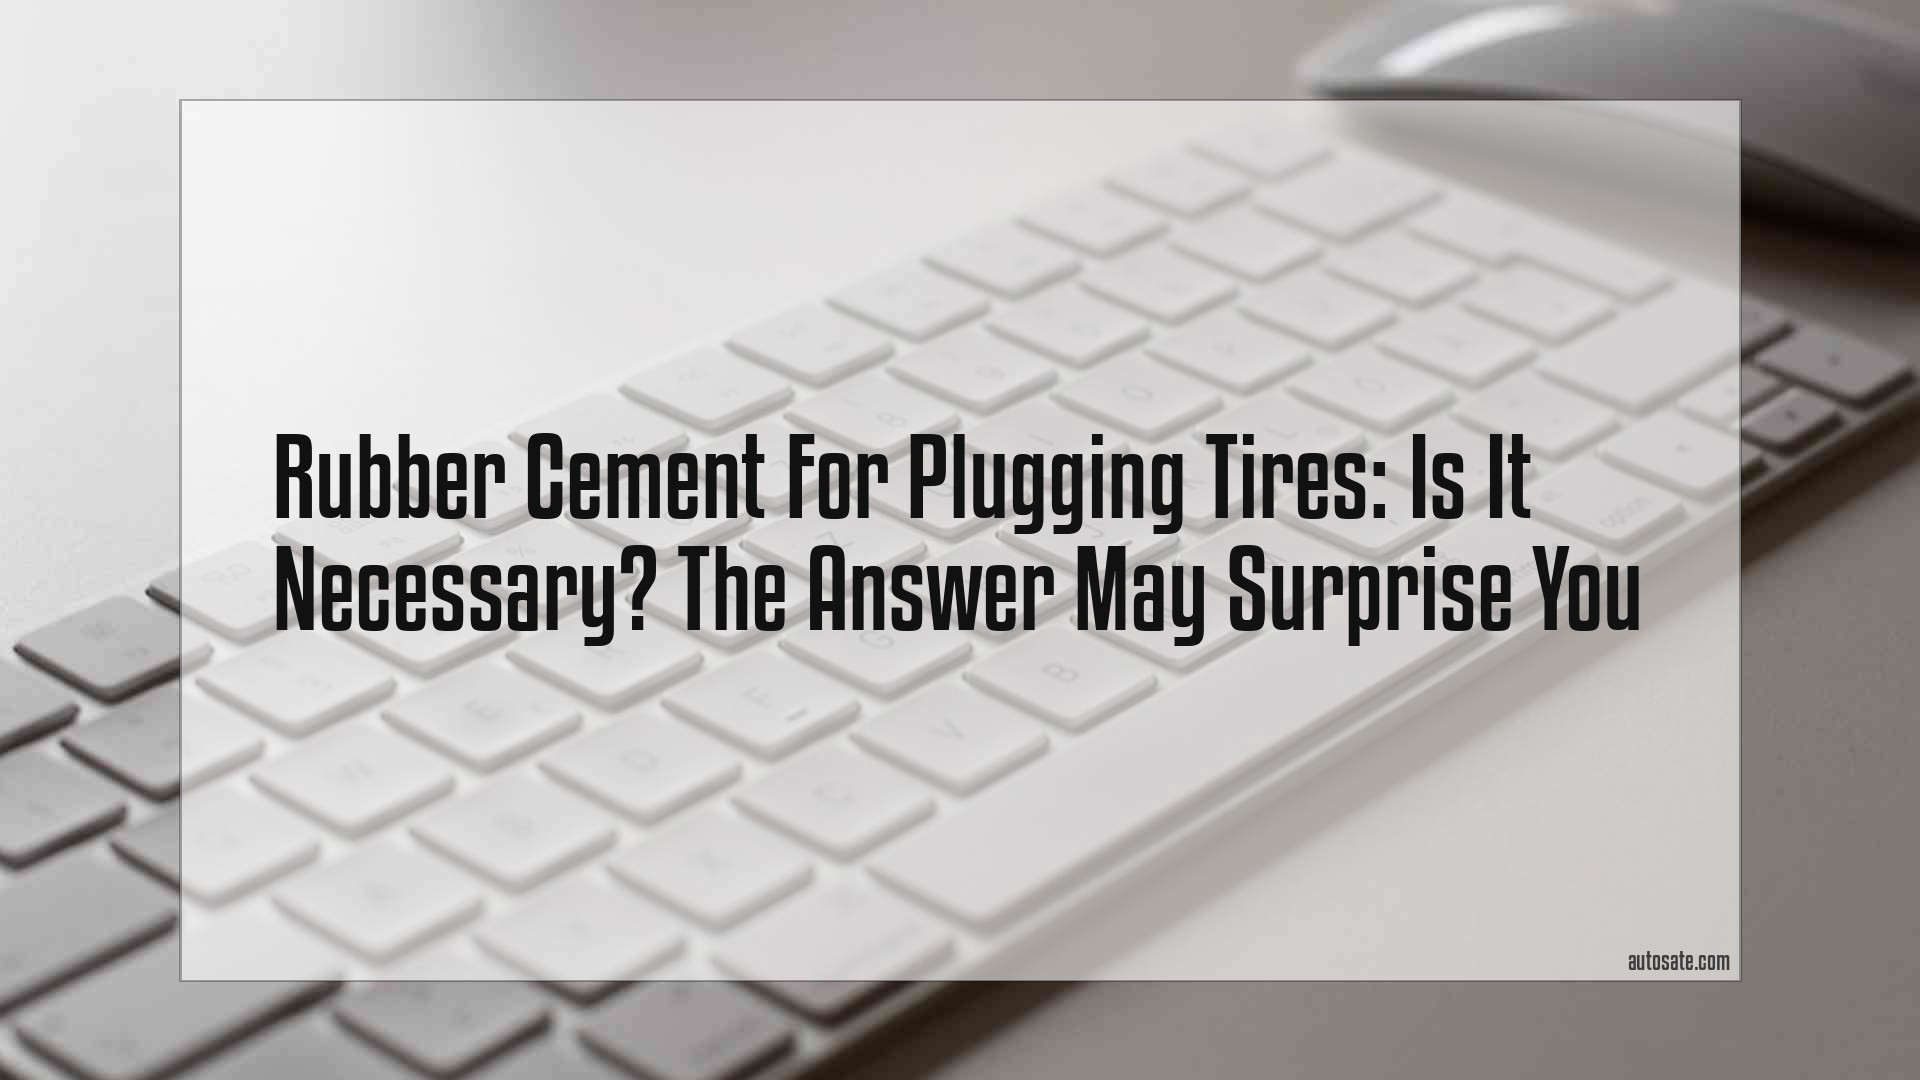 Rubber Cement For Plugging Tires: Is It Necessary? The Answer May Surprise You